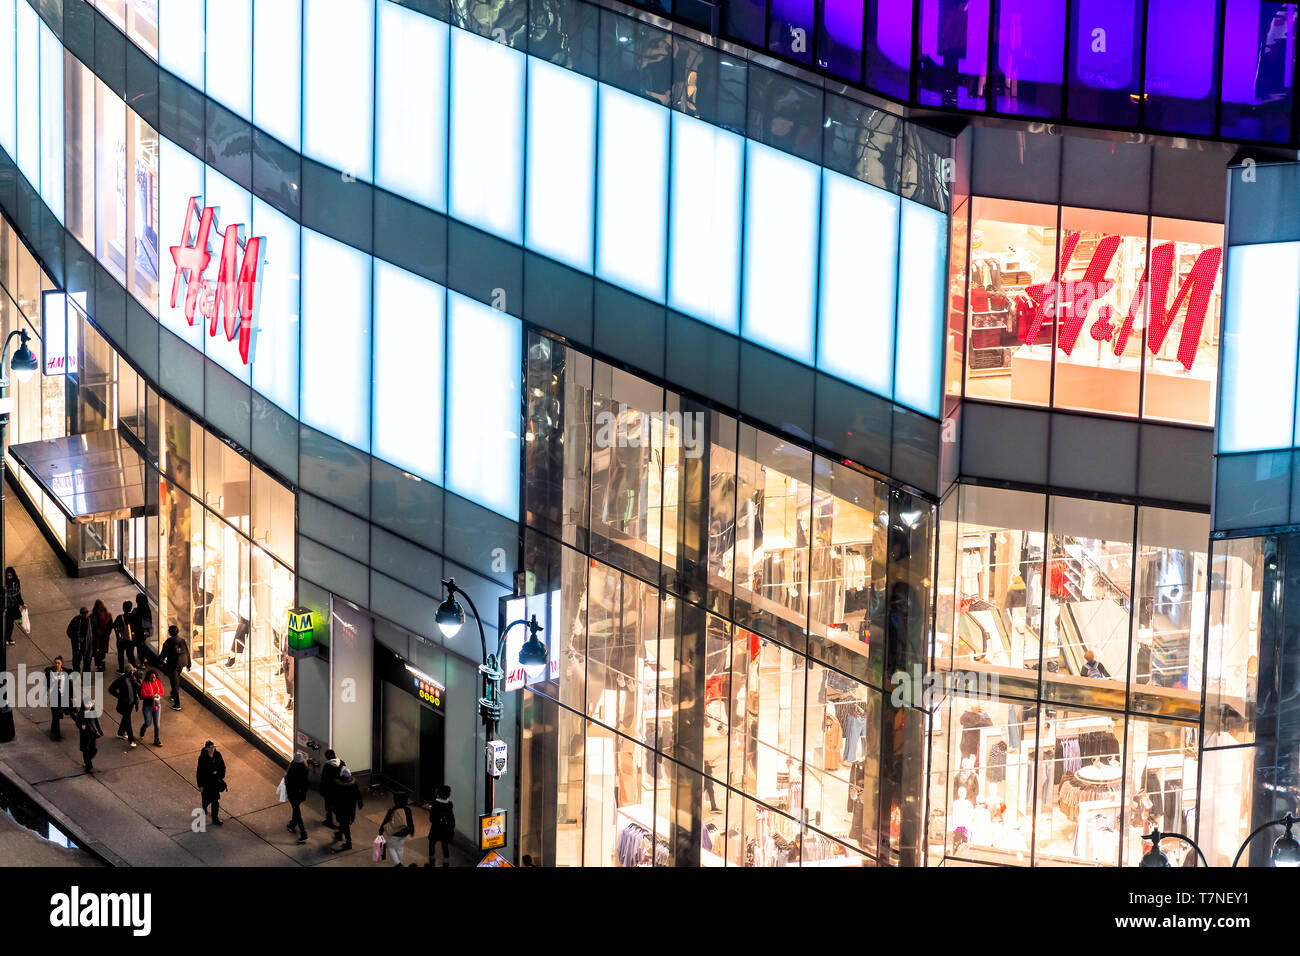 New York City, USA - April 6, 2018: High angle view of H&M store at  intersection of NYC Herald Square midtown at night closeup Stock Photo -  Alamy